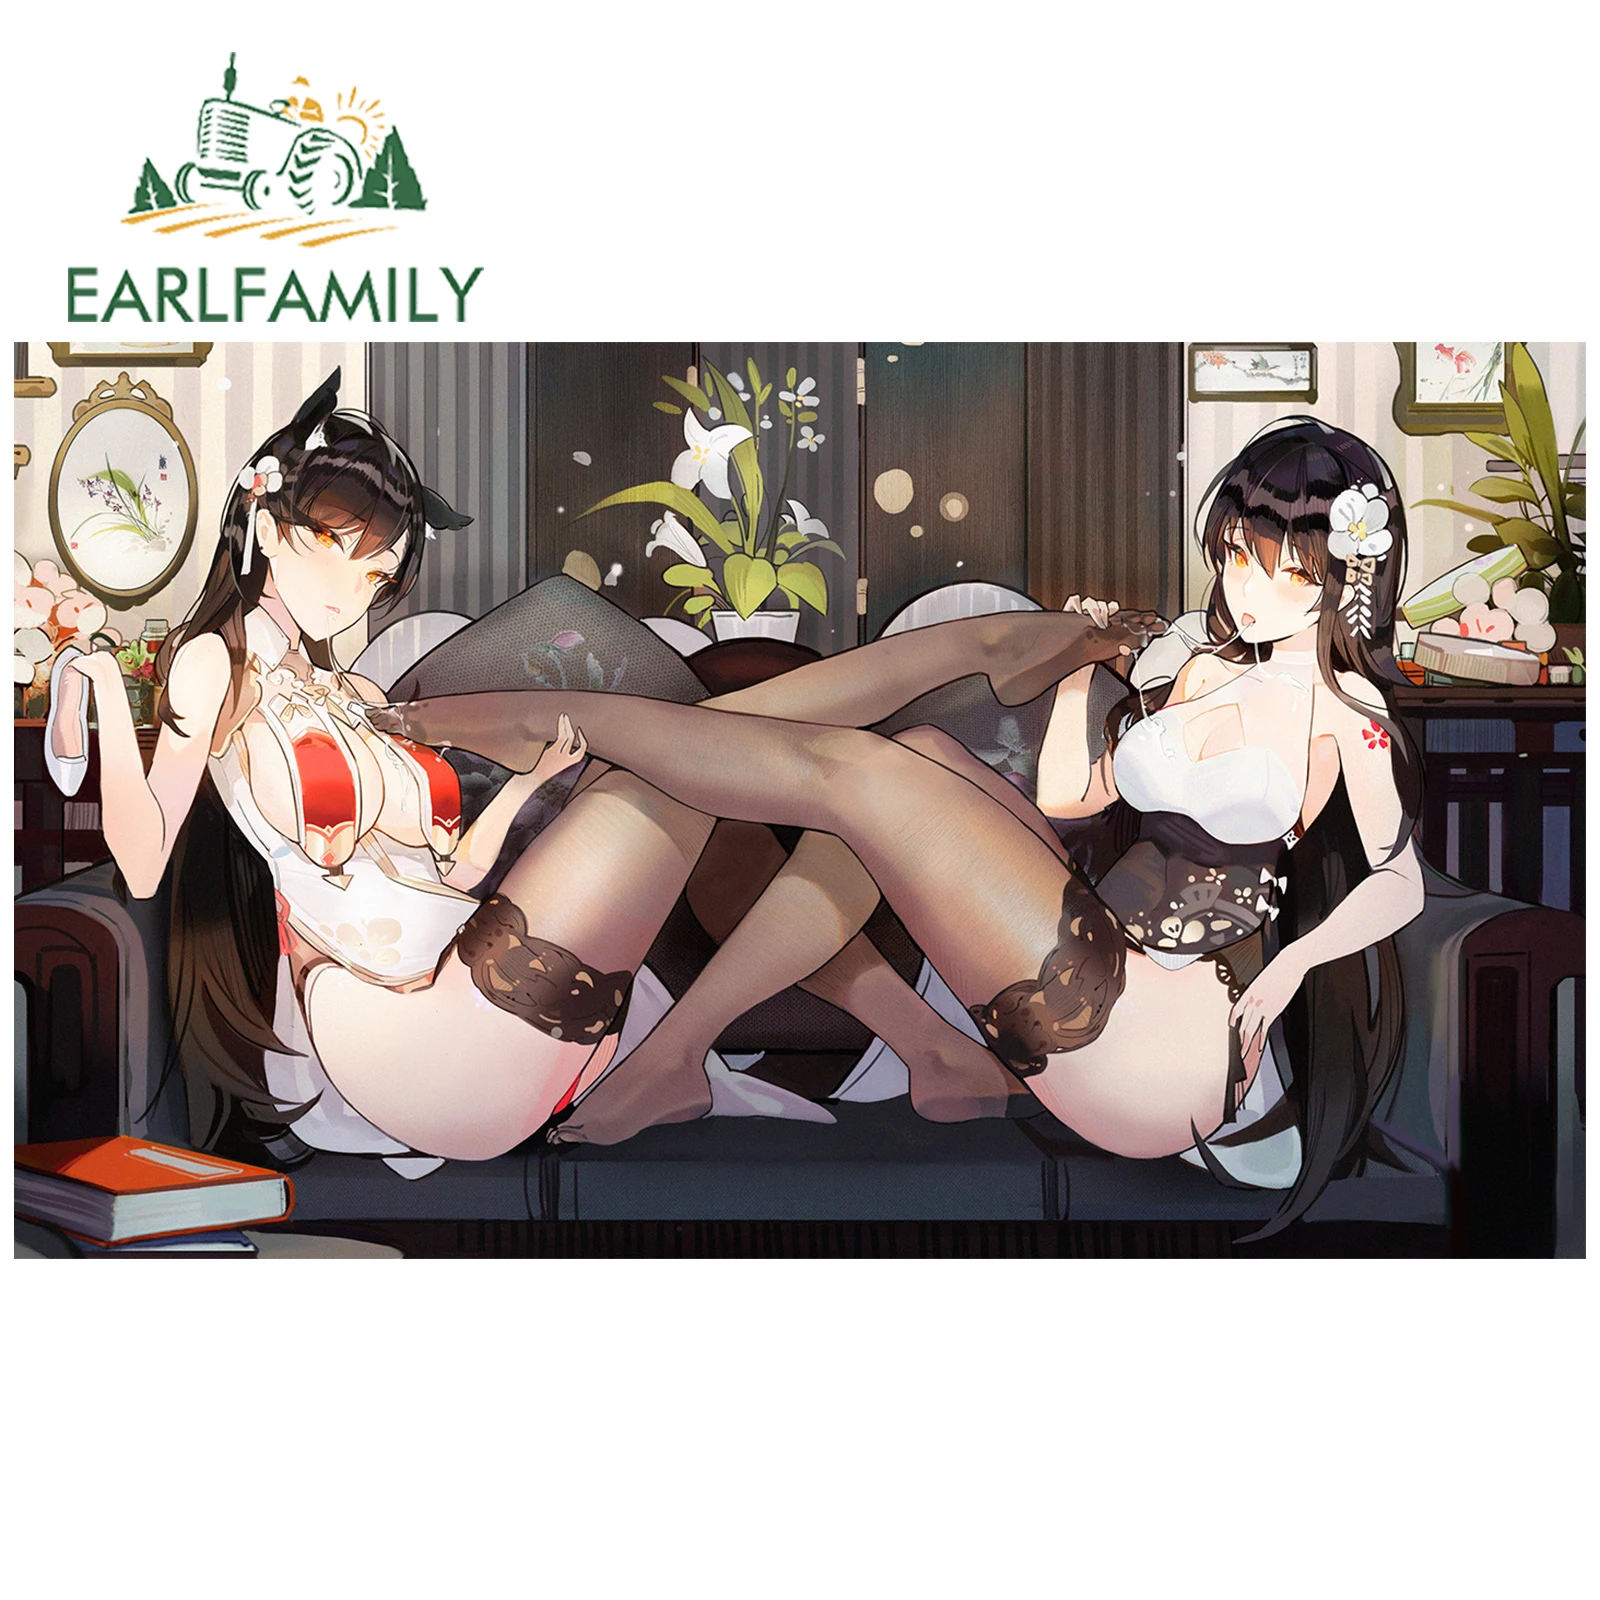 

EARLFAMILY 13cm x 7.6cm for Sexy Anime Girl Decal Refrigerator Personality Car Stickers Bumper Scratch-Proof JDM Decoration